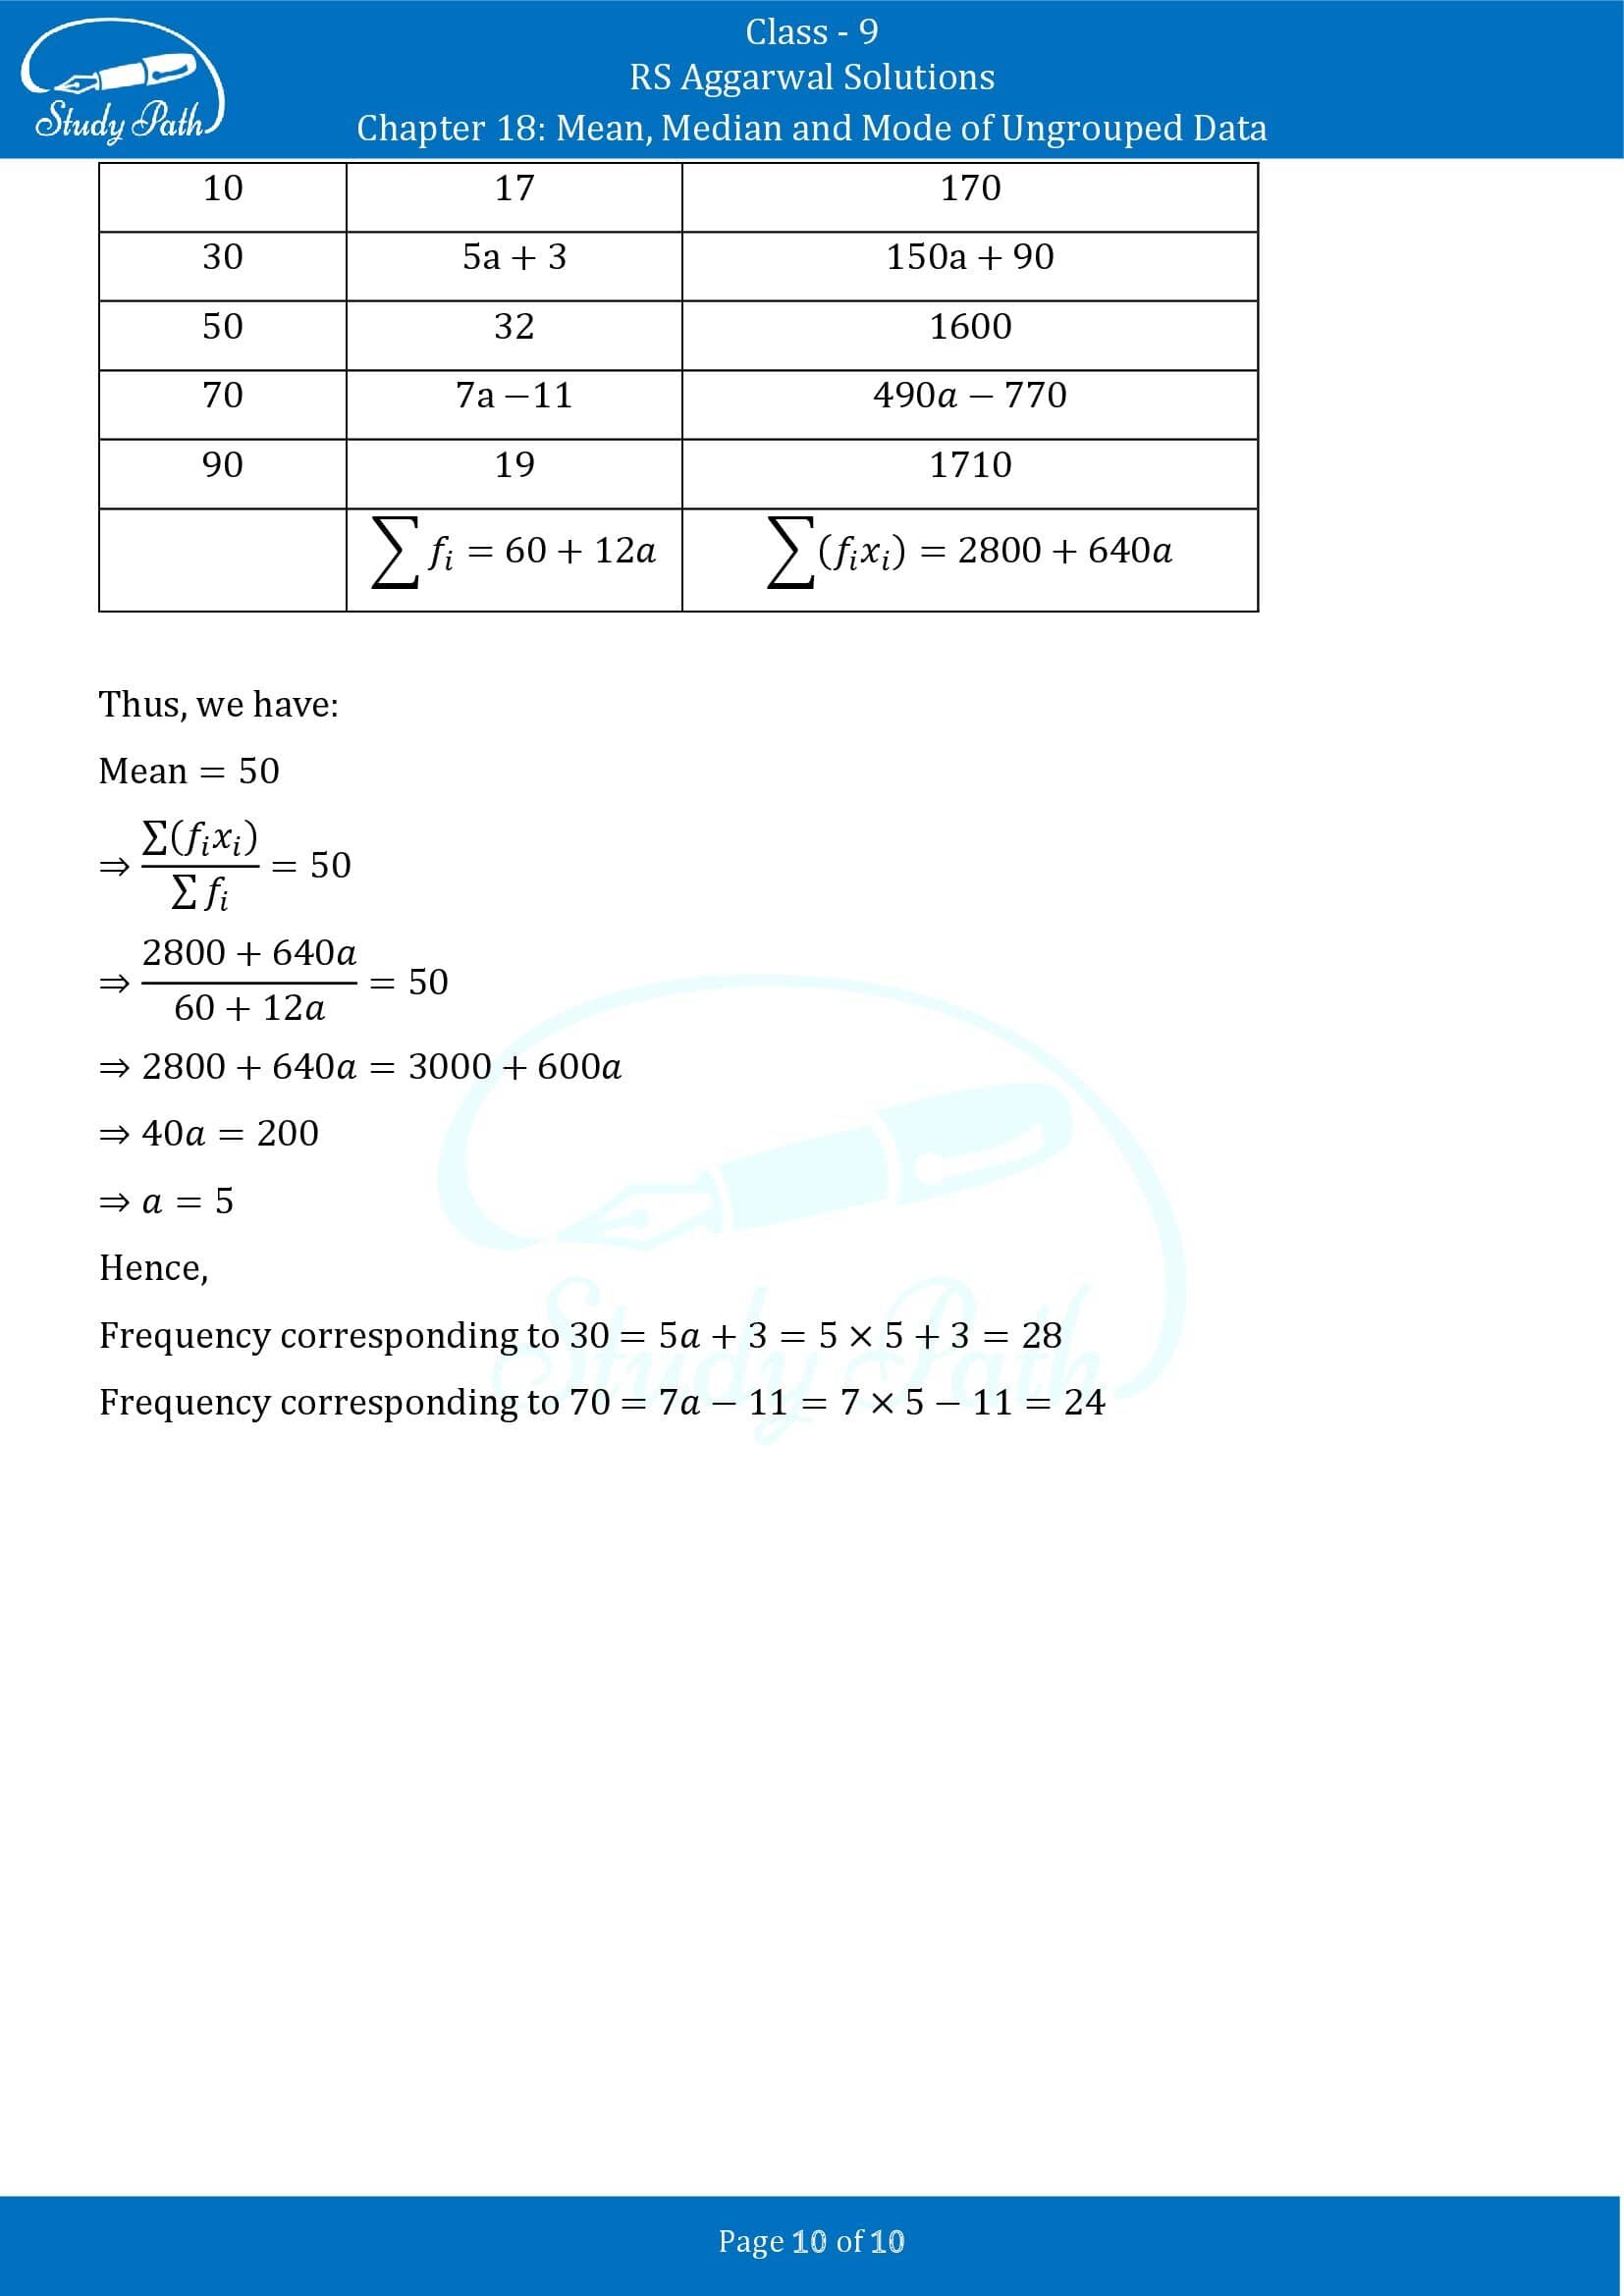 RS Aggarwal Solutions Class 9 Chapter 18 Mean Median and Mode of Ungrouped Data Exercise 18B 00010